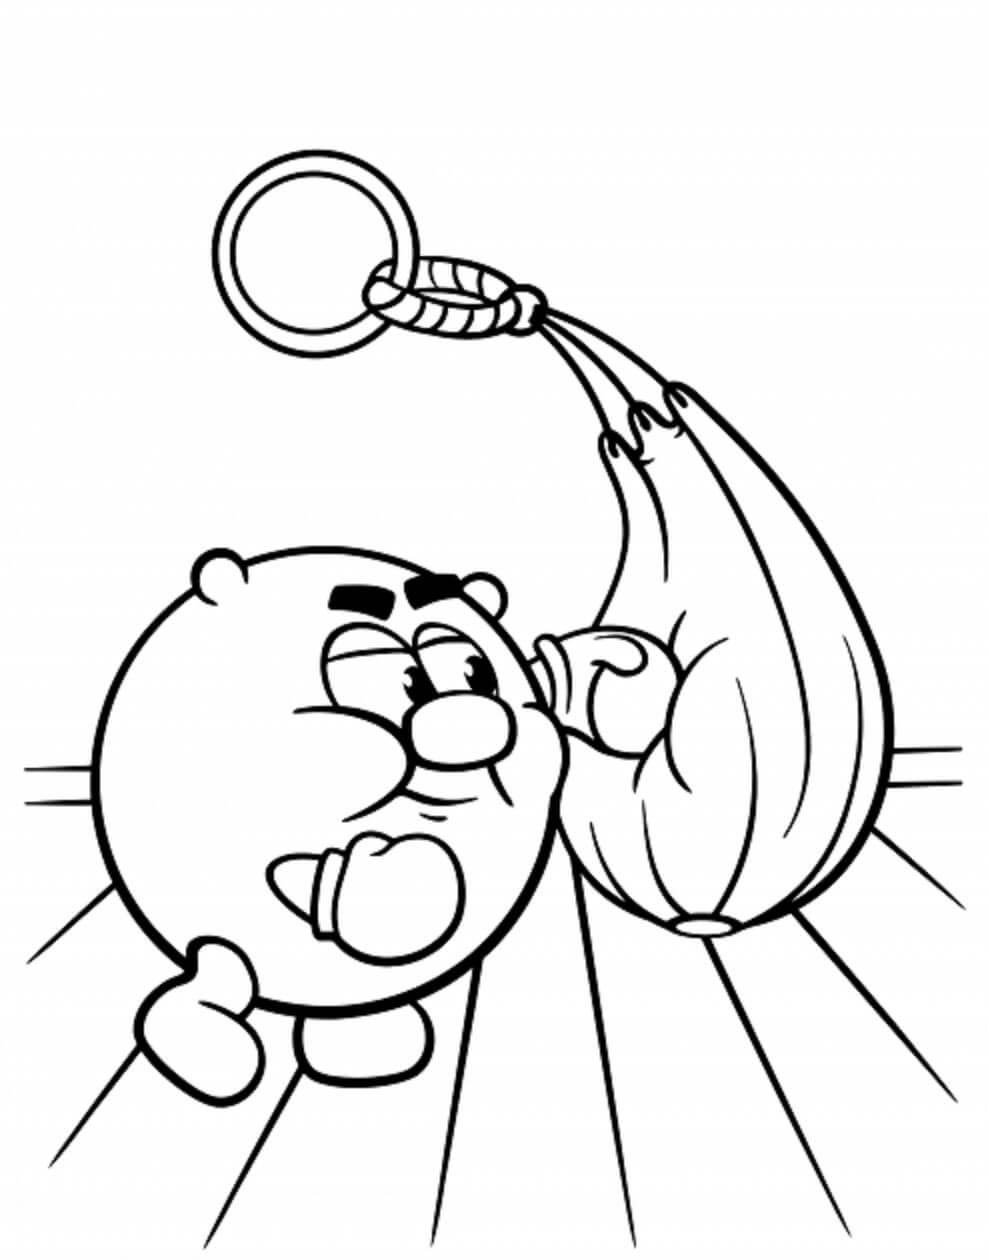 Boxeur Kopatych coloring page